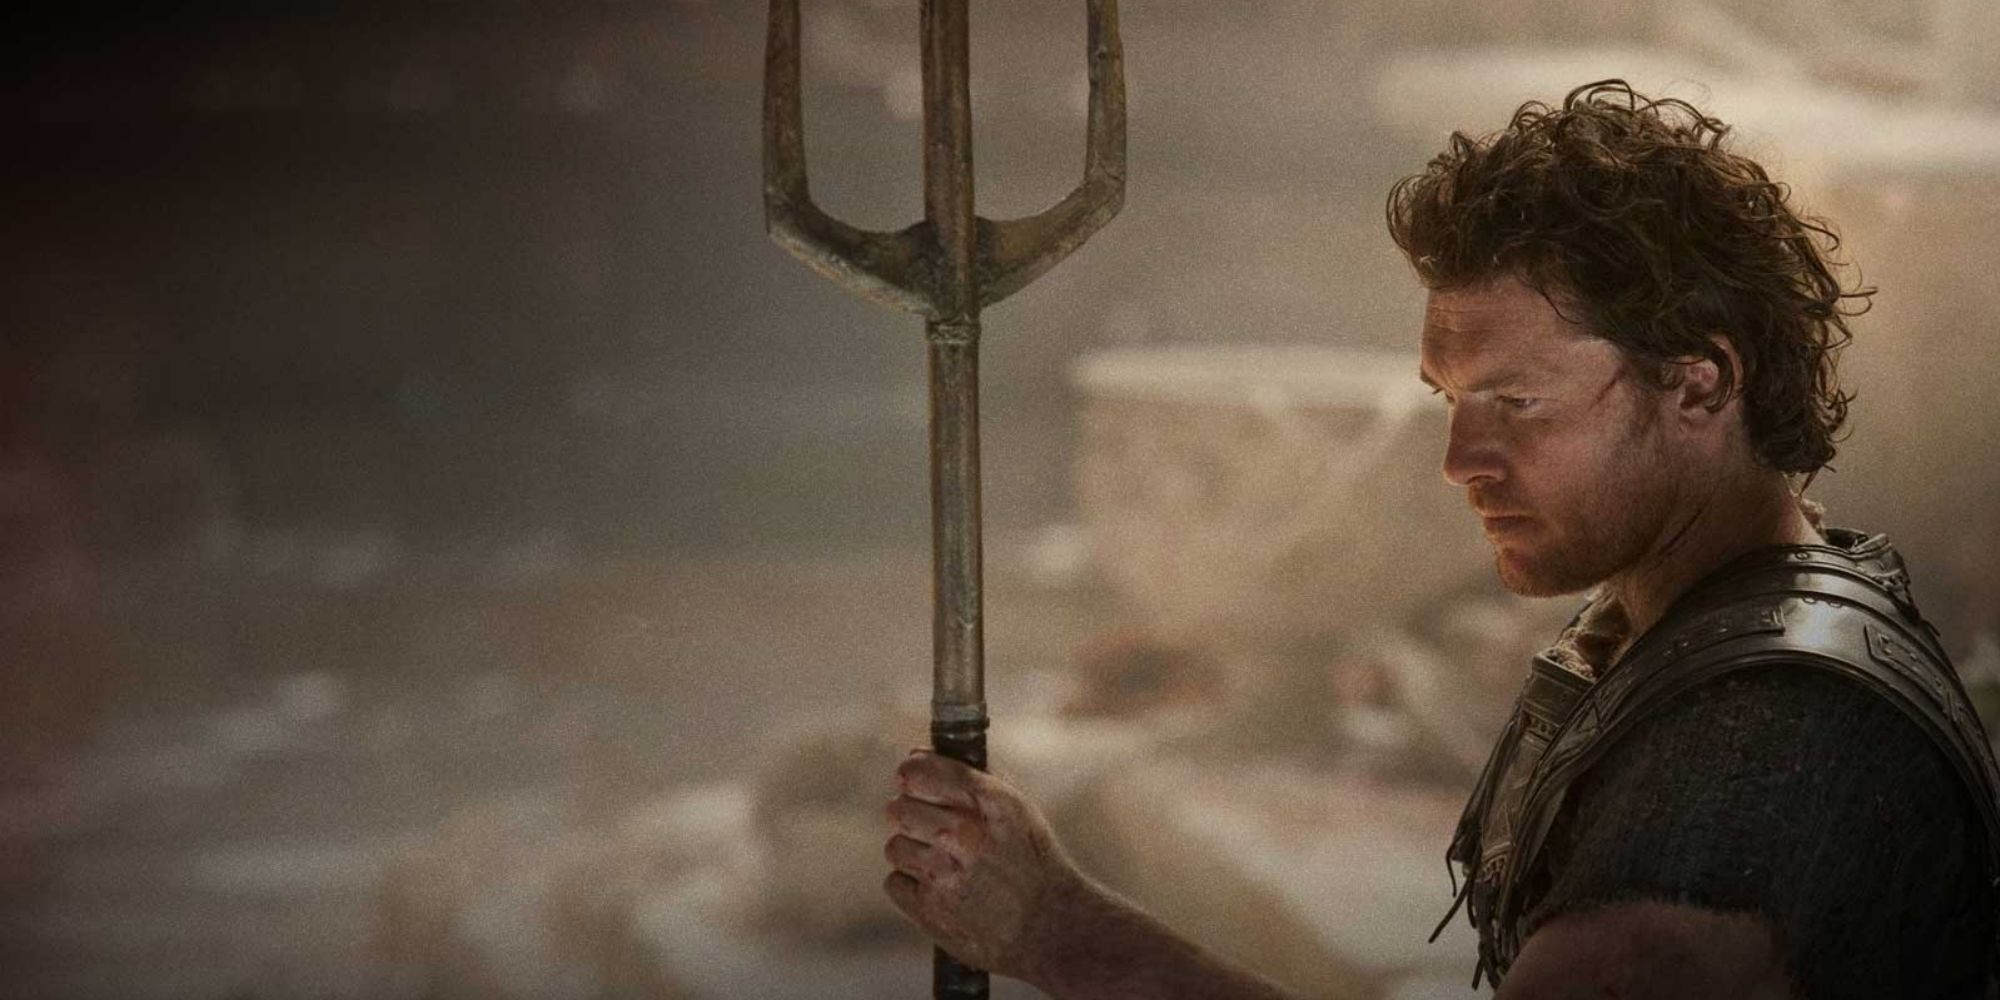 Perseus with Poseidon's trident in 'Wrath of the Titans'